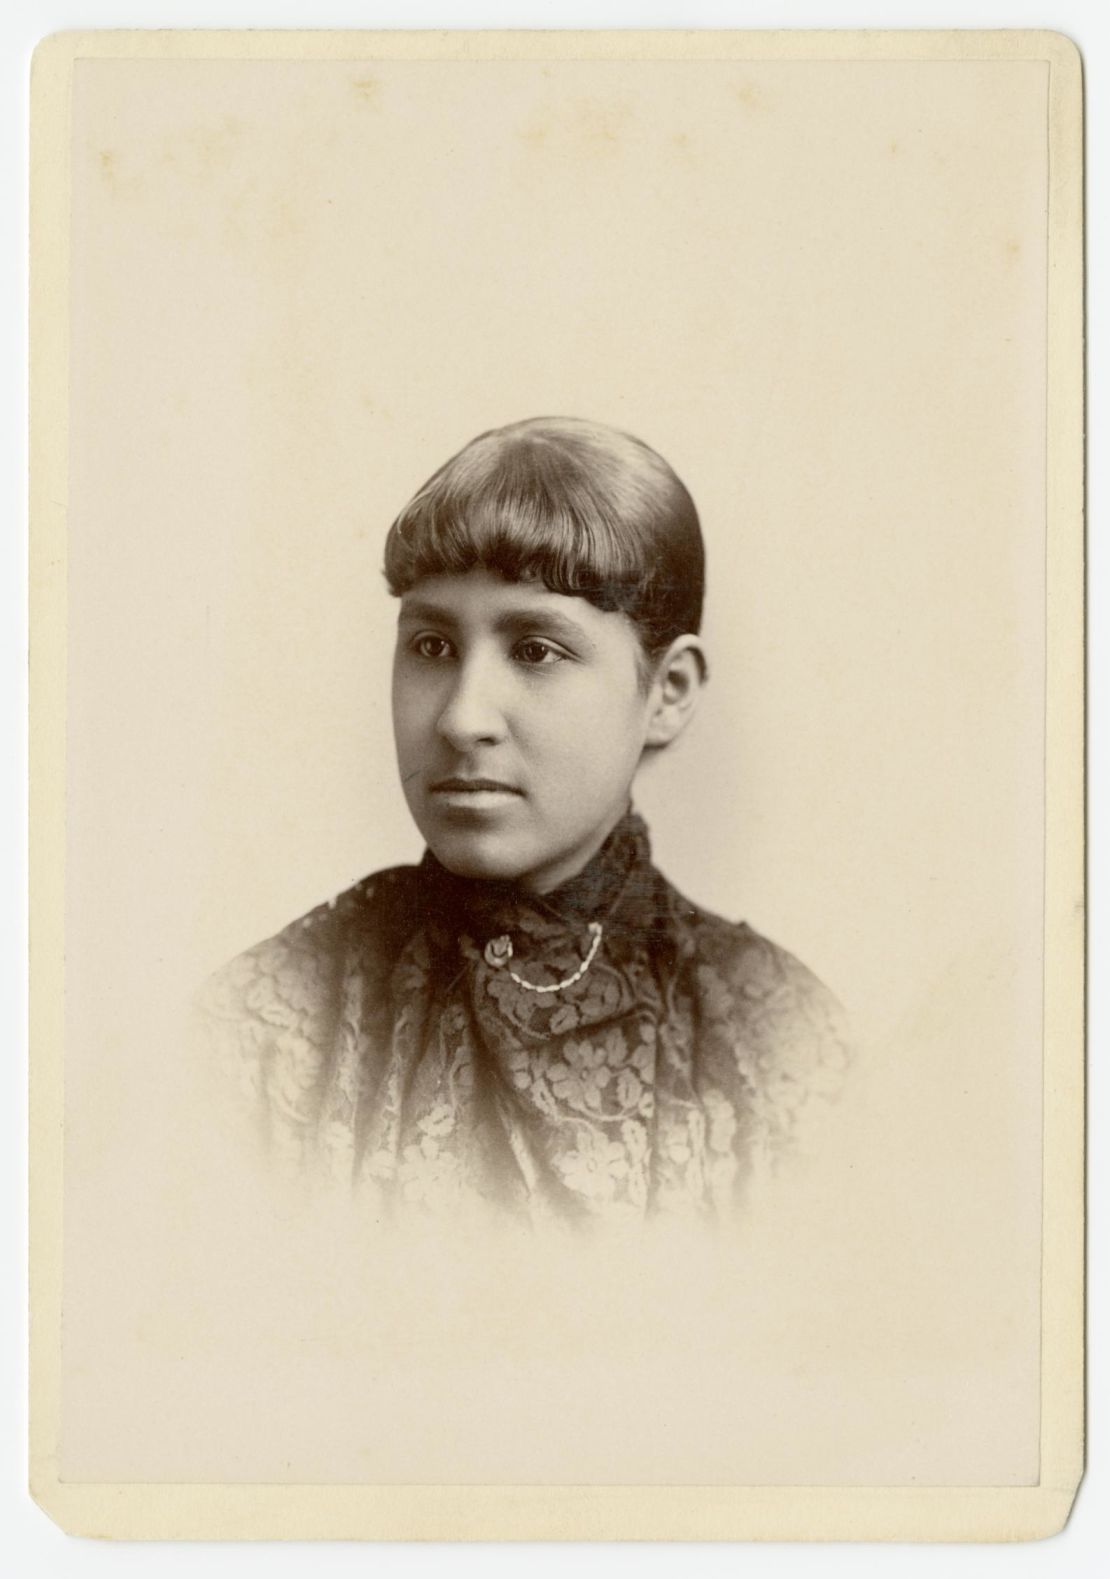 A 1884 portrait of Mary E. Church Terrell, one of the first African-American women to earn a college degree. She was a suffragist and campaigned for civil rights. 